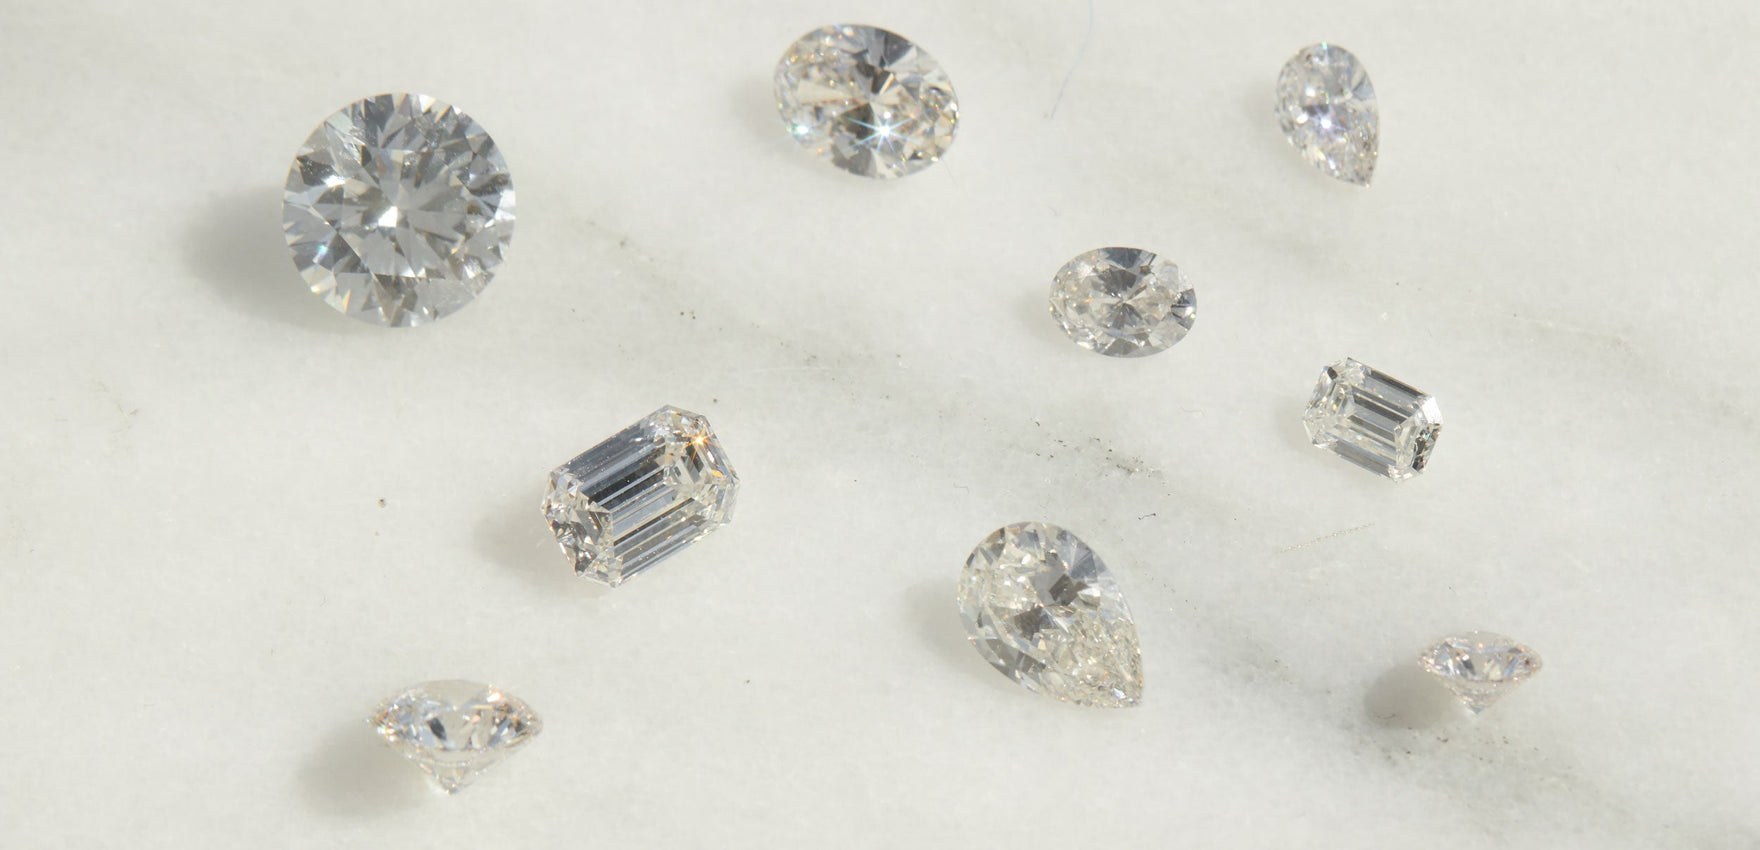 What is a Diamond and what are the different types?